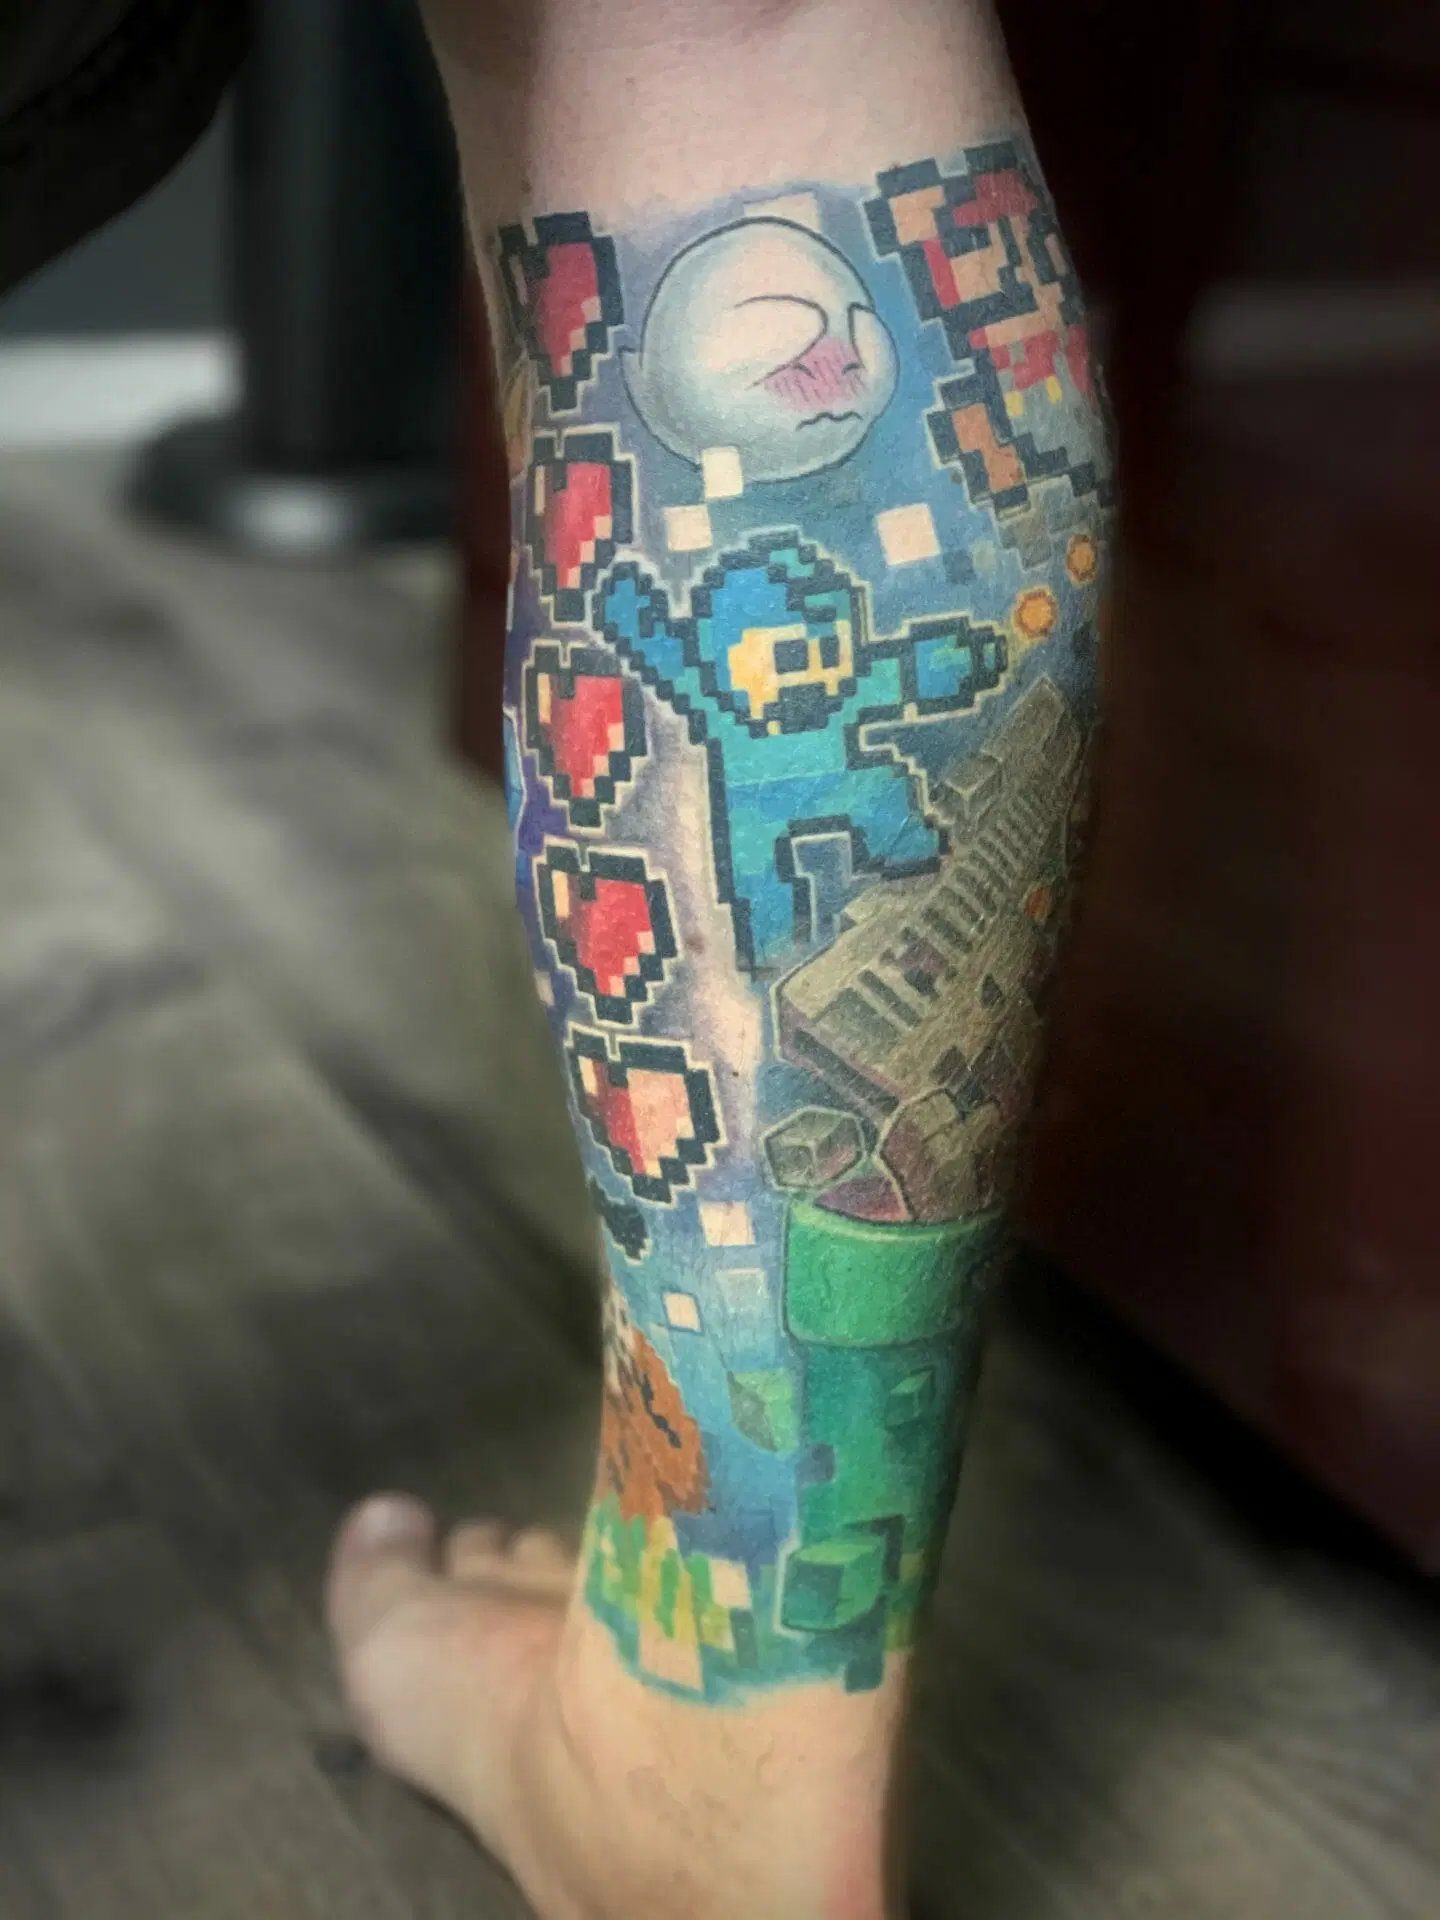 A man having his first tattoo experience with a nintendo tattoo on his leg.